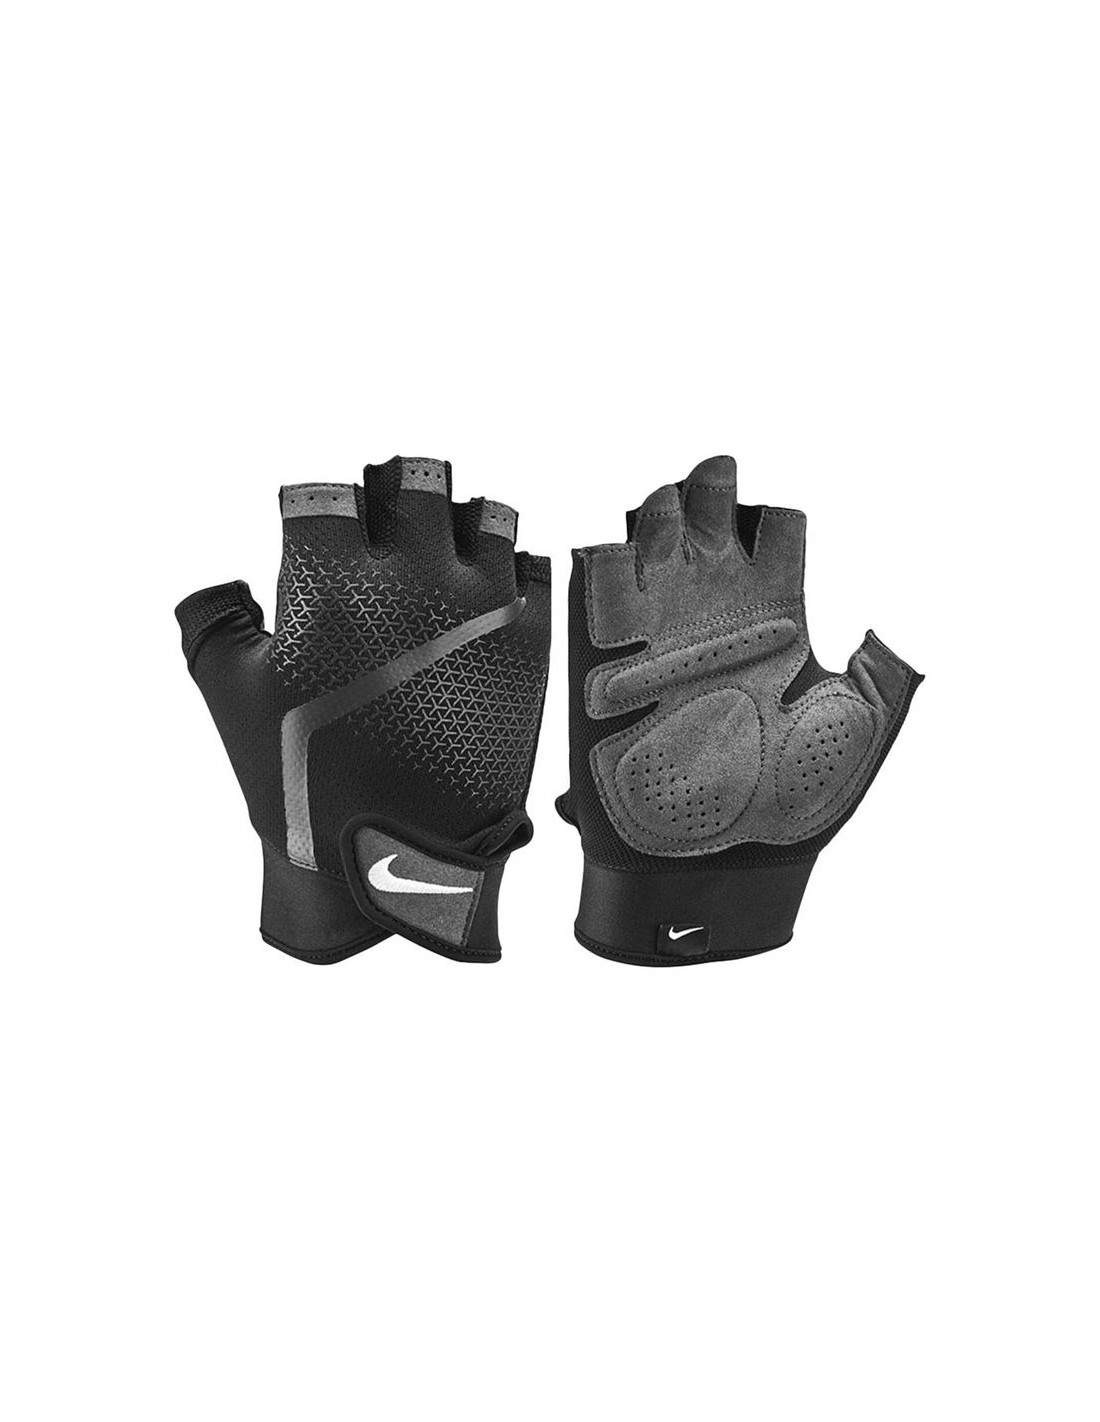 Guantes de fitness nike musculación extreme fitness